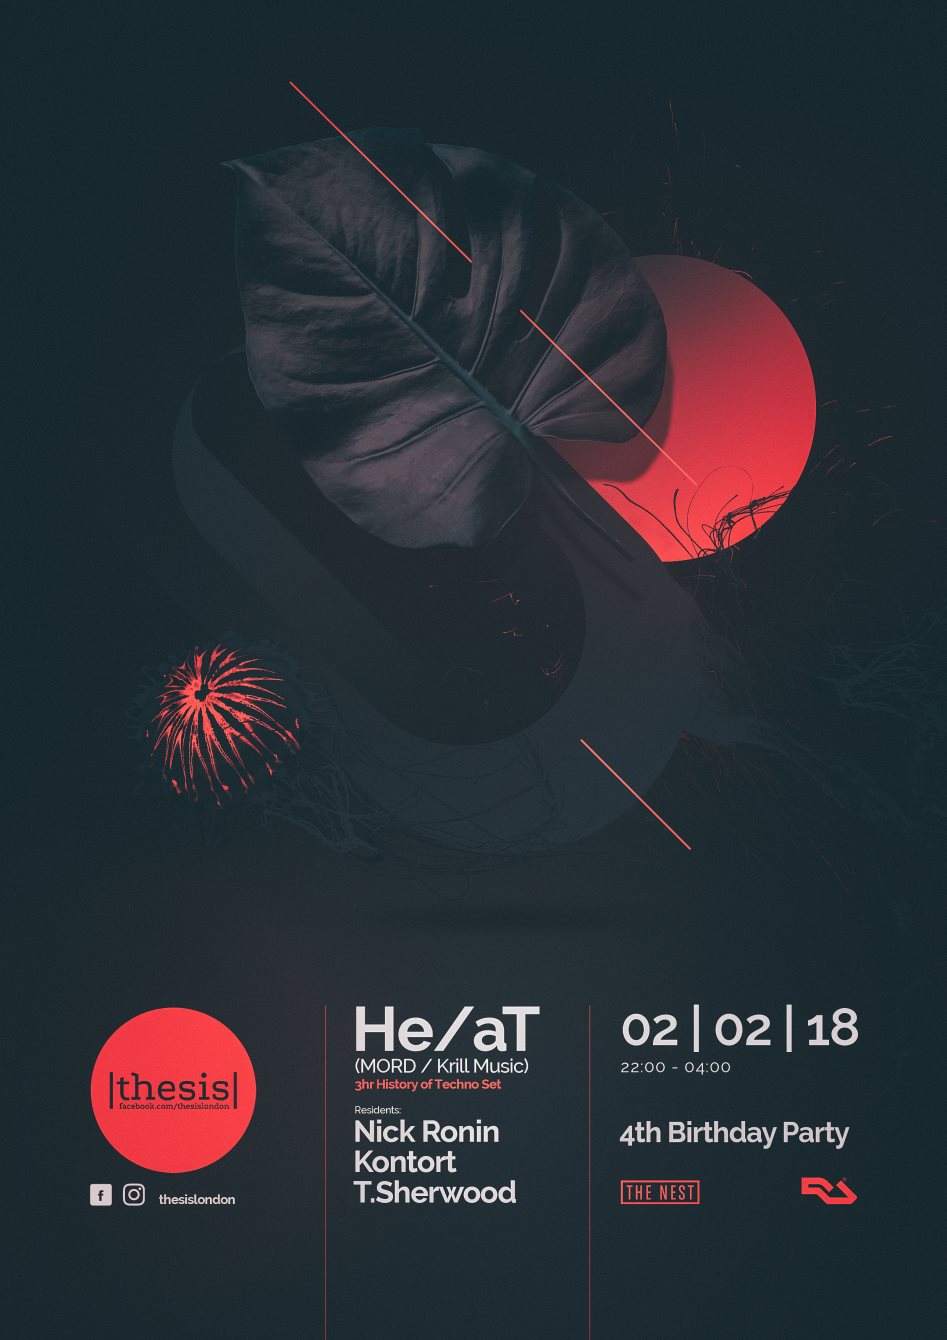 thesis 4th Birthday: He/aT 3hr History Of Techno Set - Página frontal